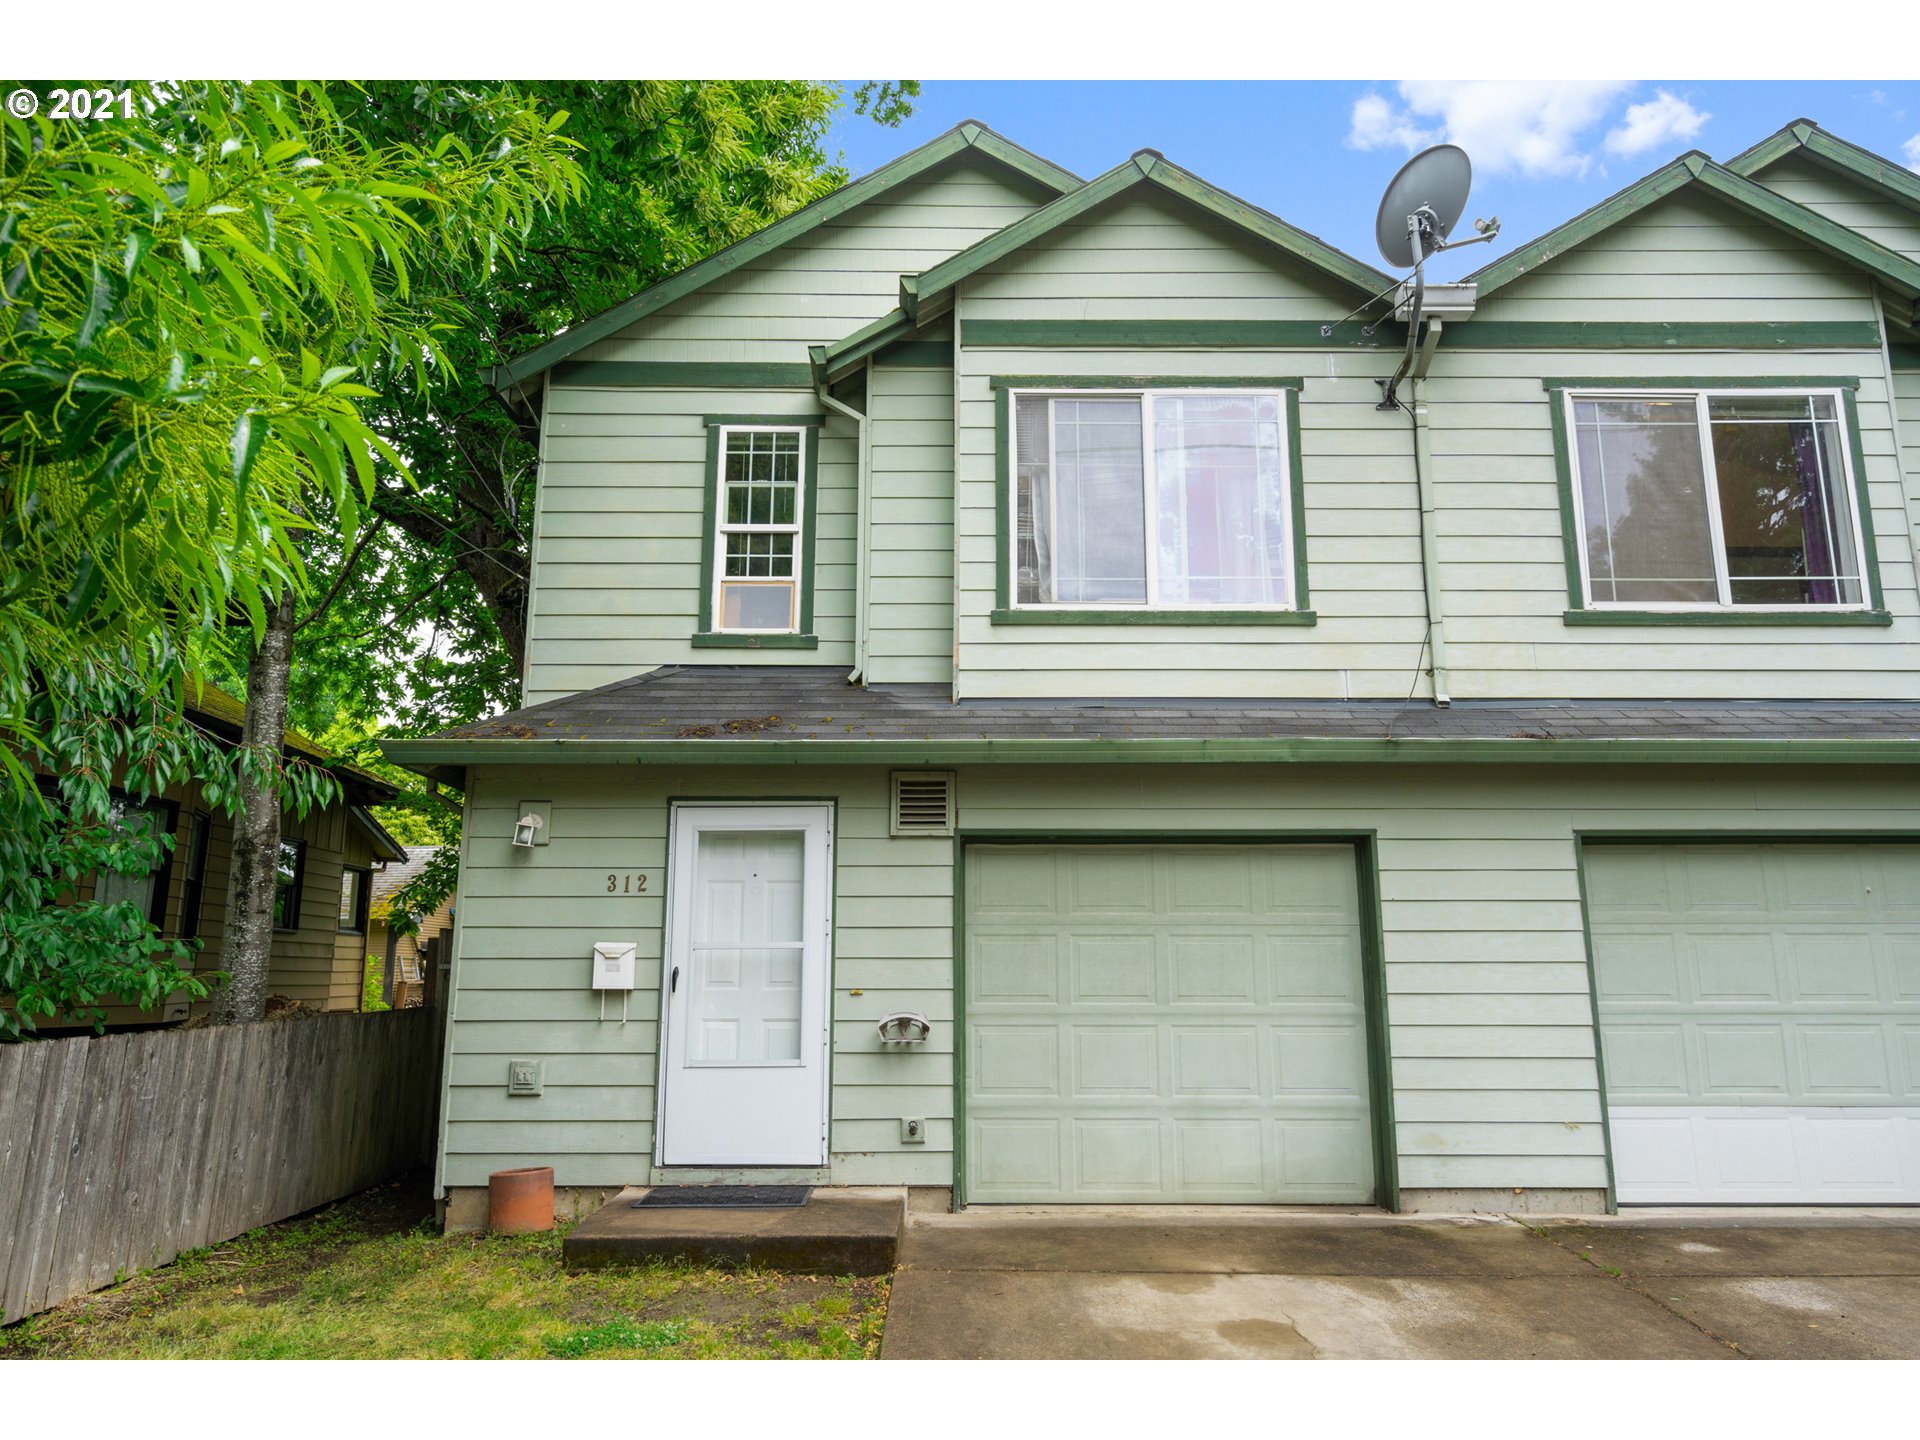 312 SE 88TH AVE (1 of 24)